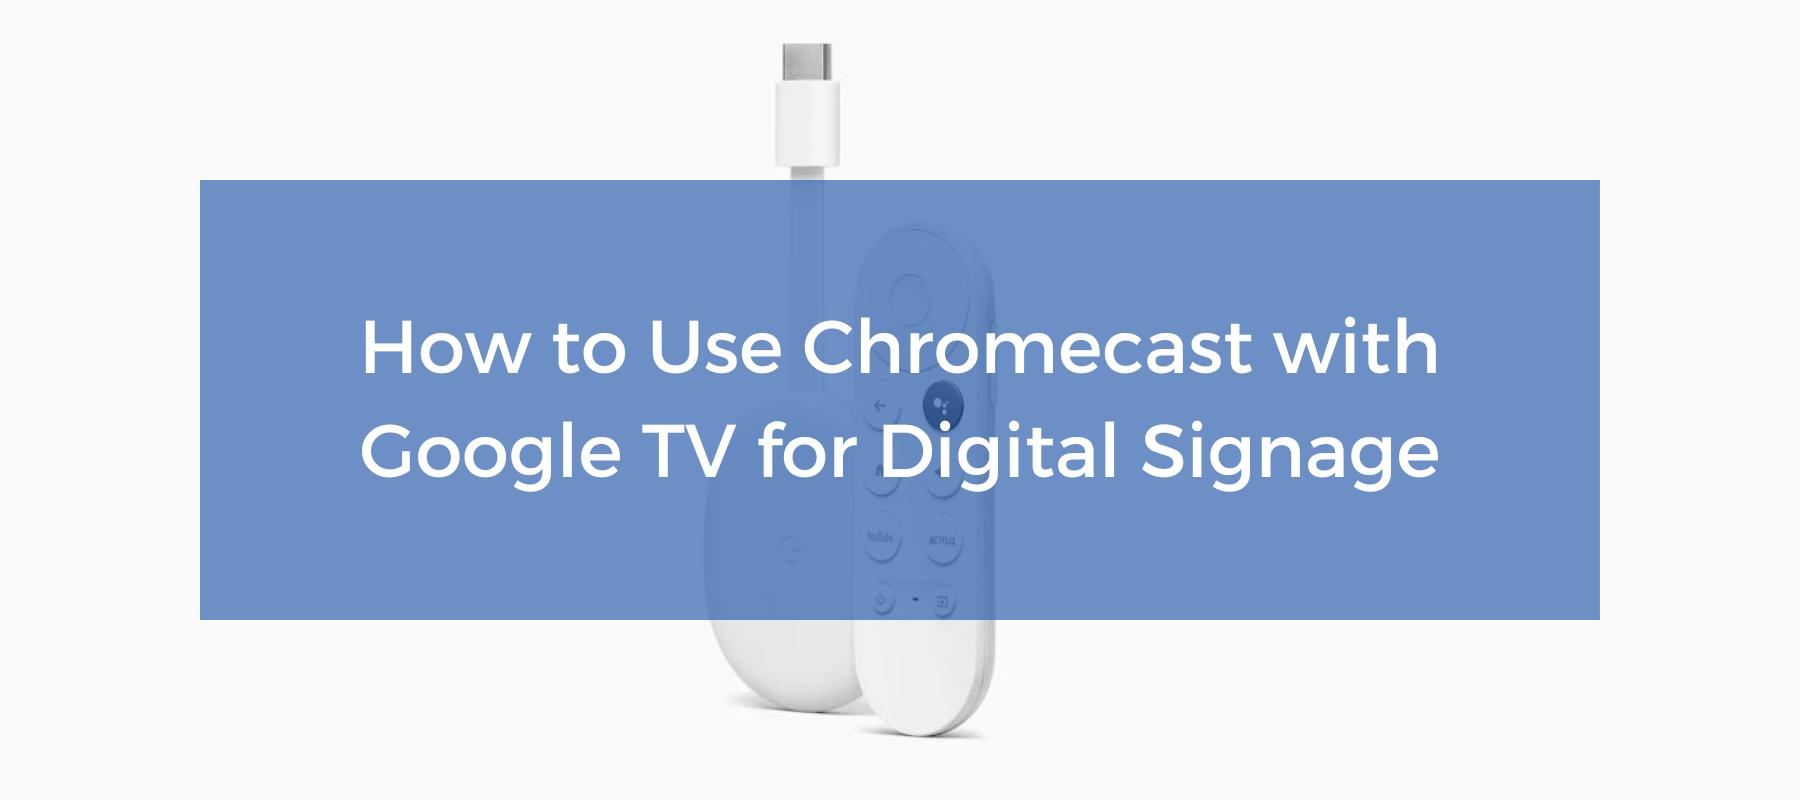 ramme Manchuriet Siesta How to Use Chromecast with Google TV for Digital Signage